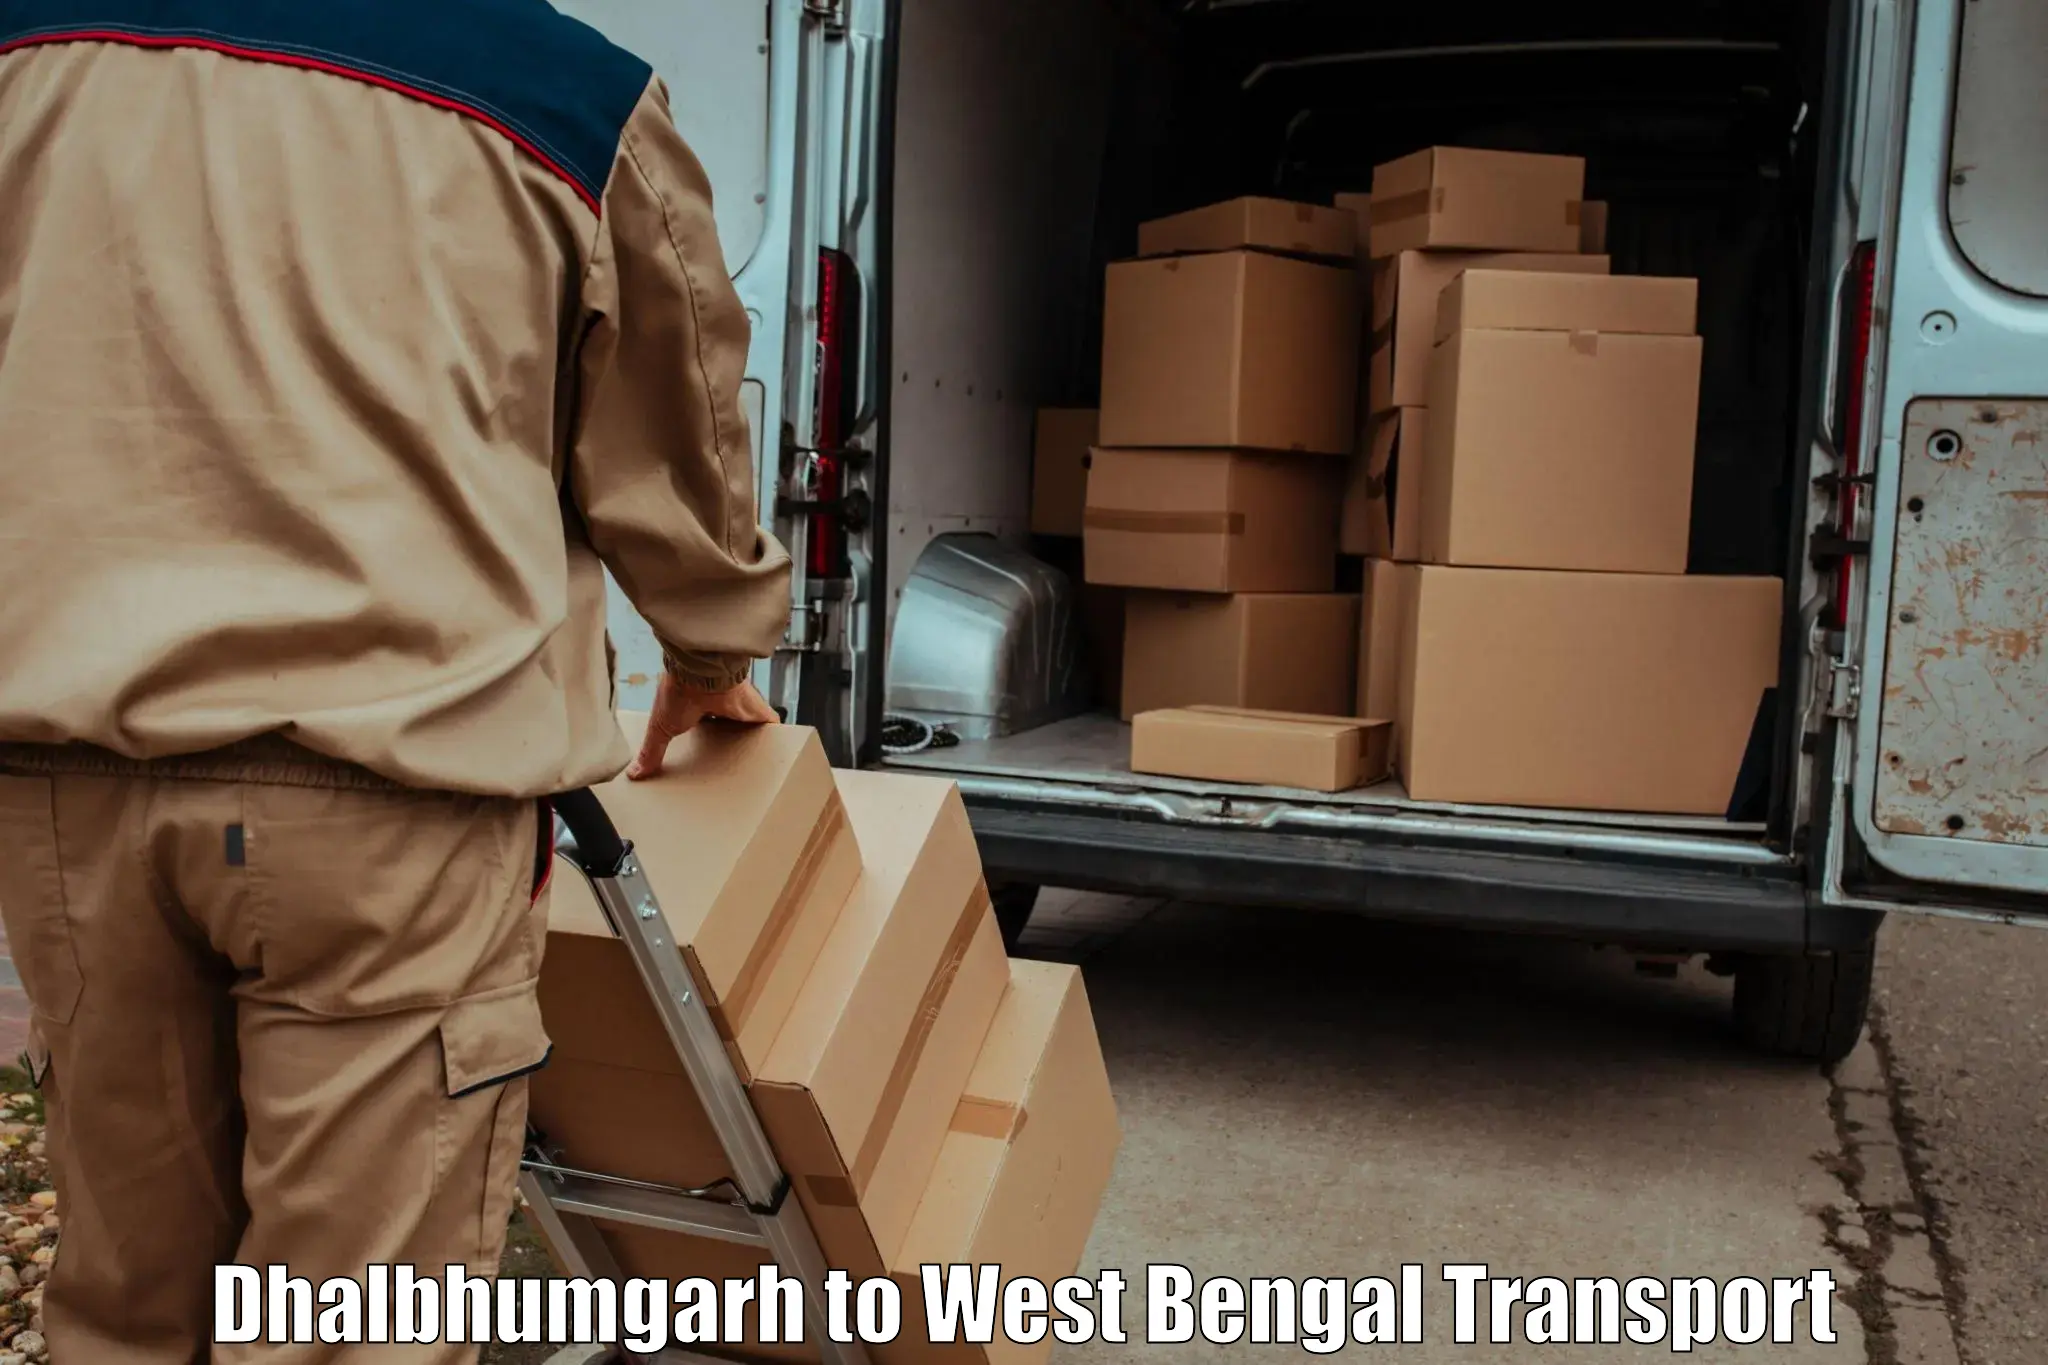 Container transport service Dhalbhumgarh to Alipore